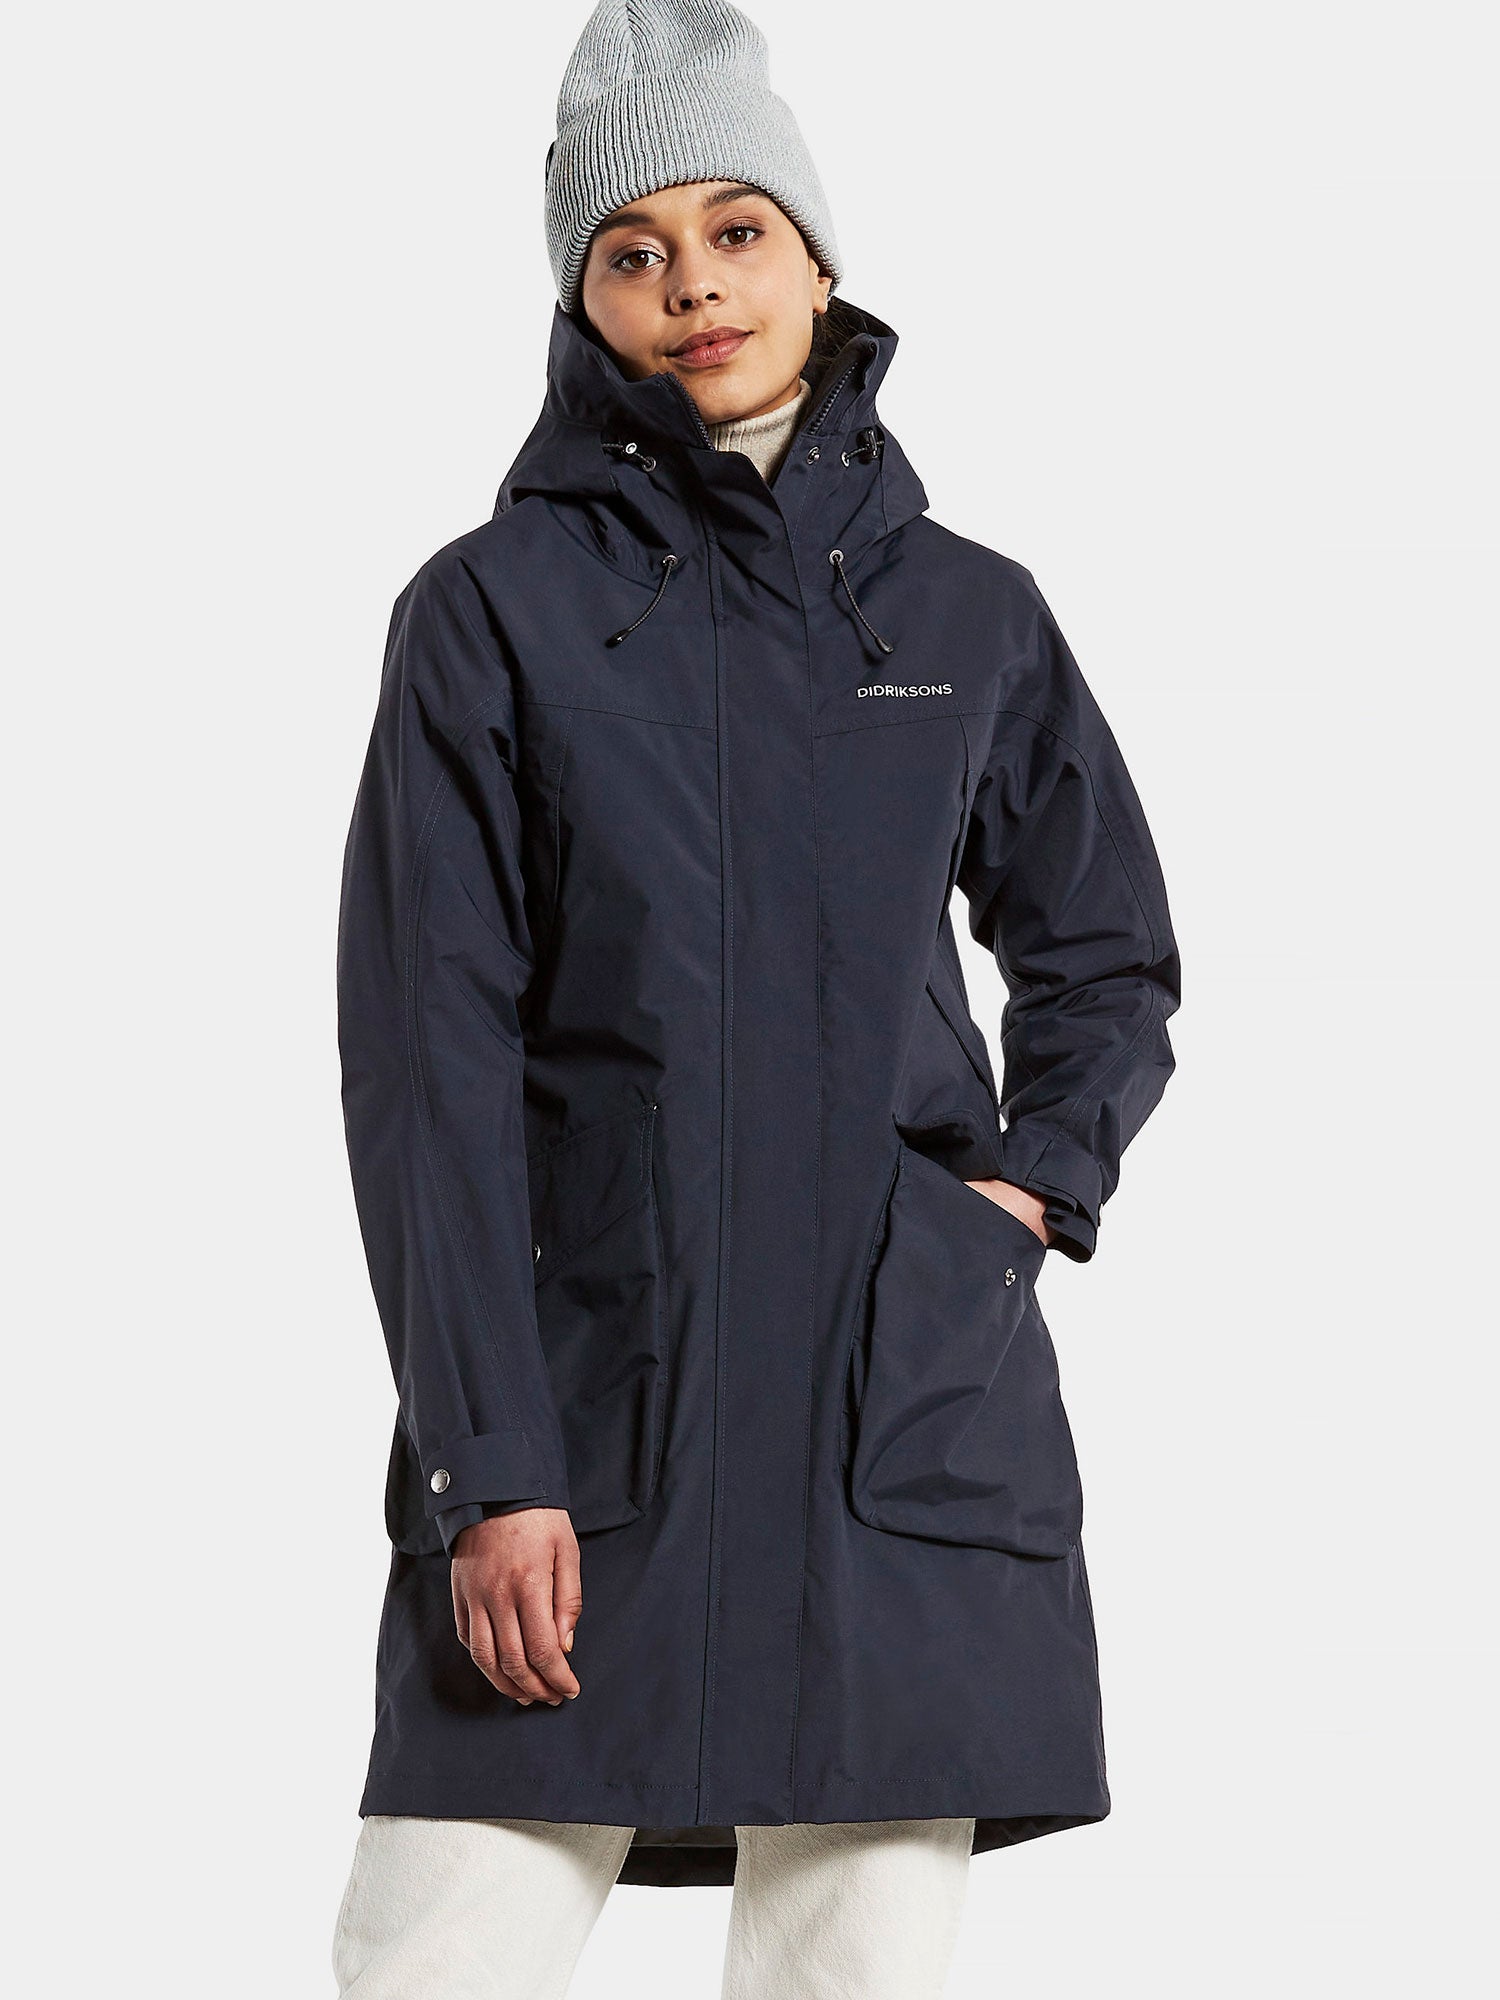 Dark night Blue new Thelma coat - our best selling 3/4 length women&